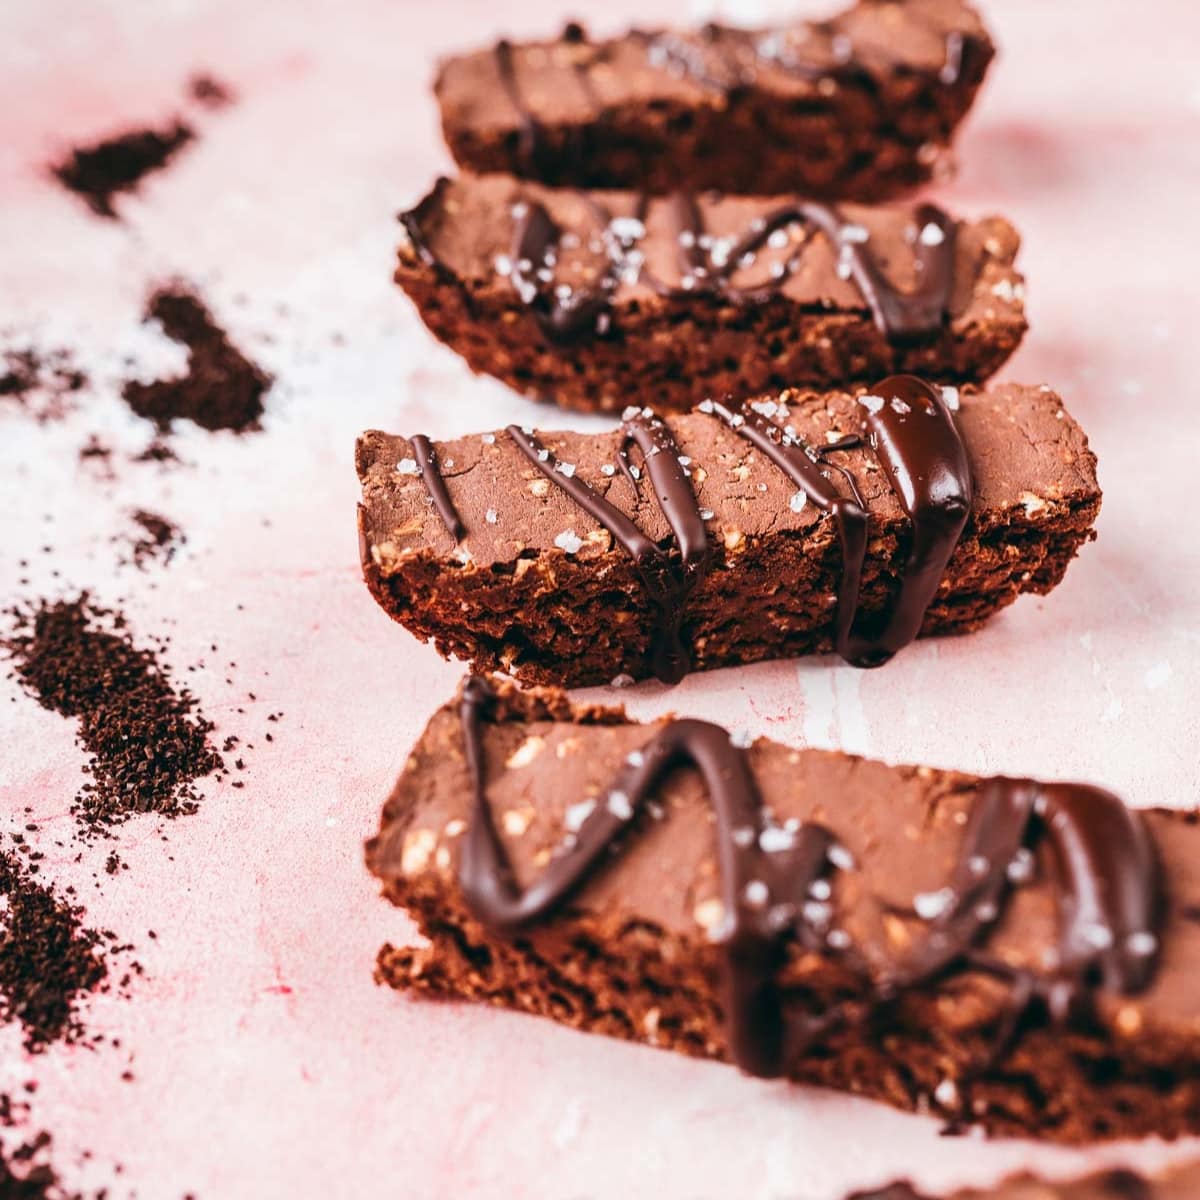 Four chocolate protein bars resting on a pink table scattered with ground coffee.